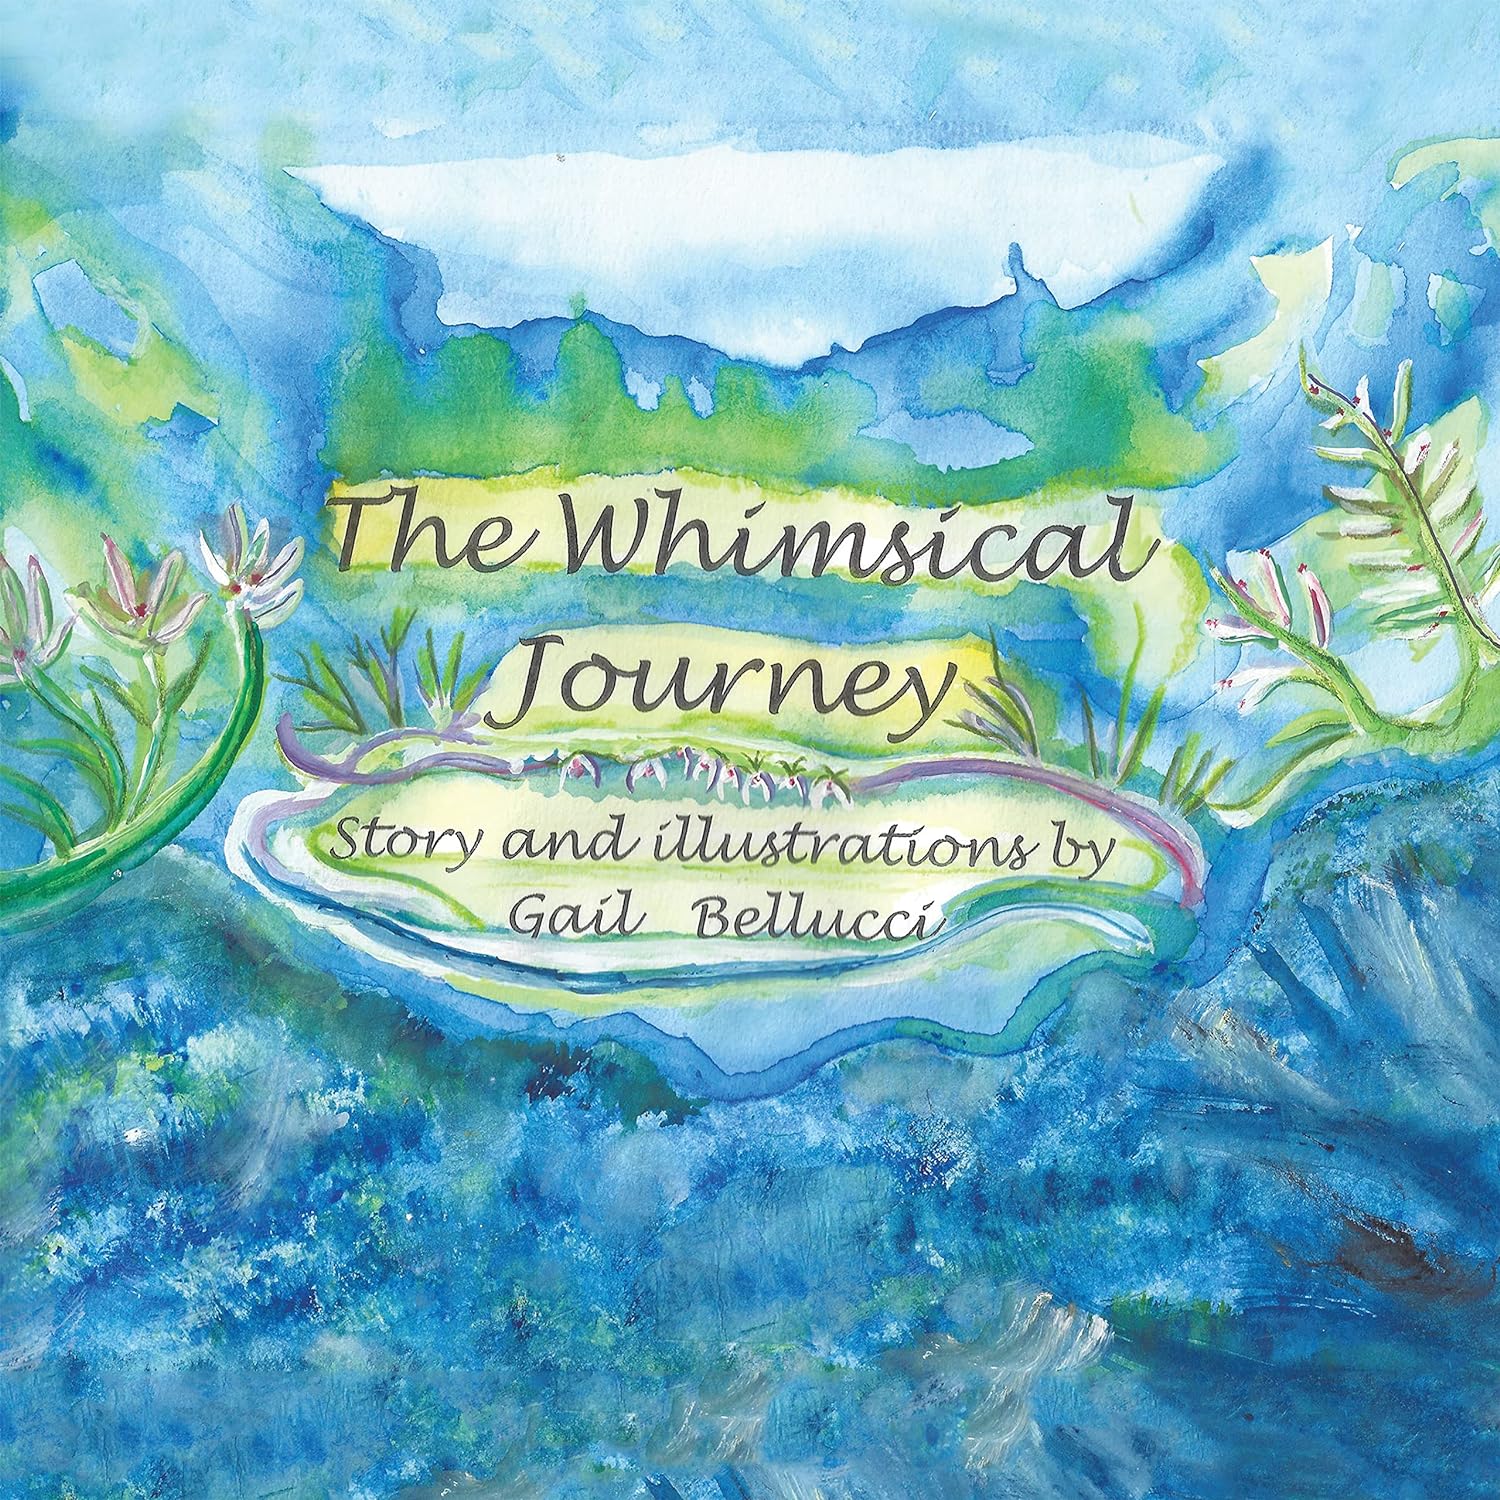 Embark on a Magical Adventure with "The Whimsical Journey" by Gail Bellucci